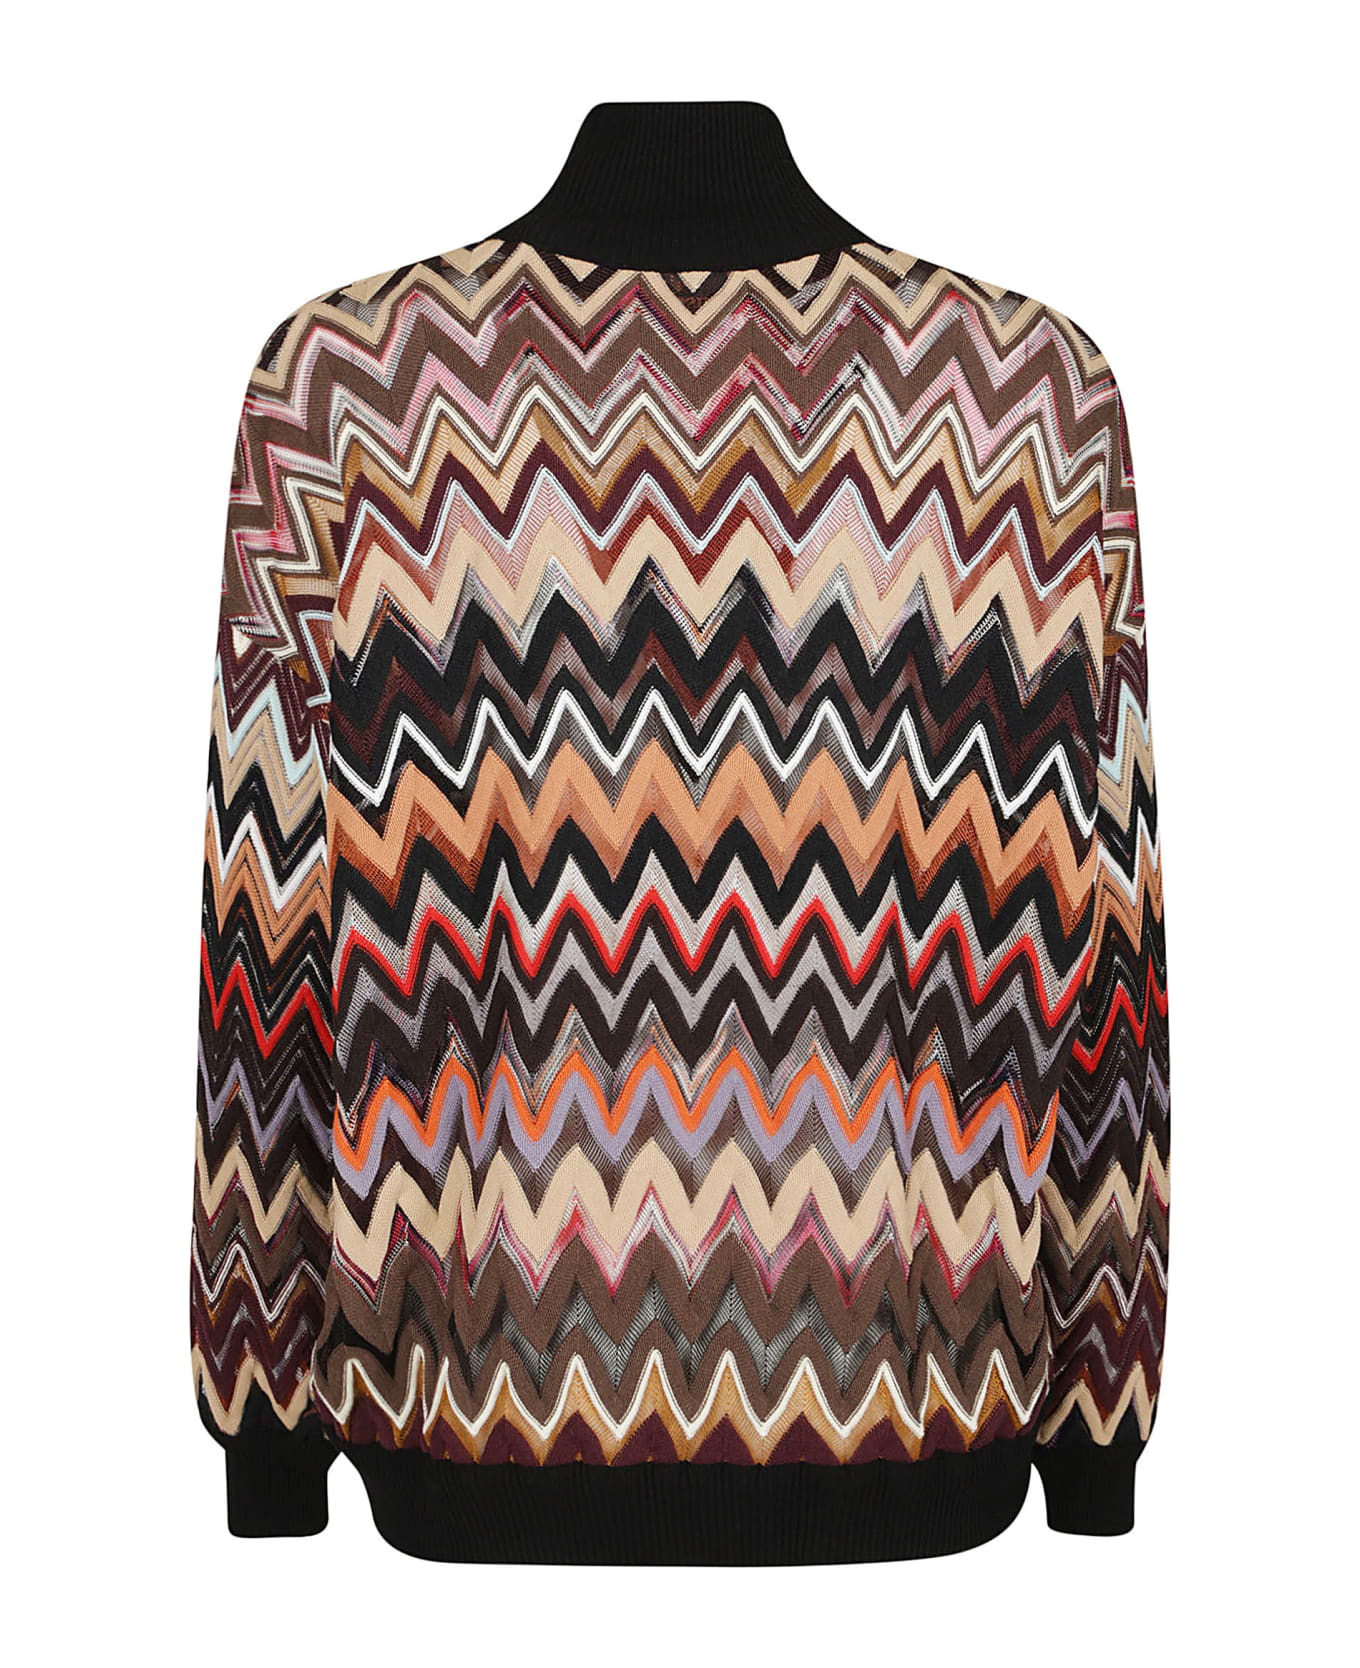 Missoni High-neck Zig-zag Patterned Sweater - Multicolor